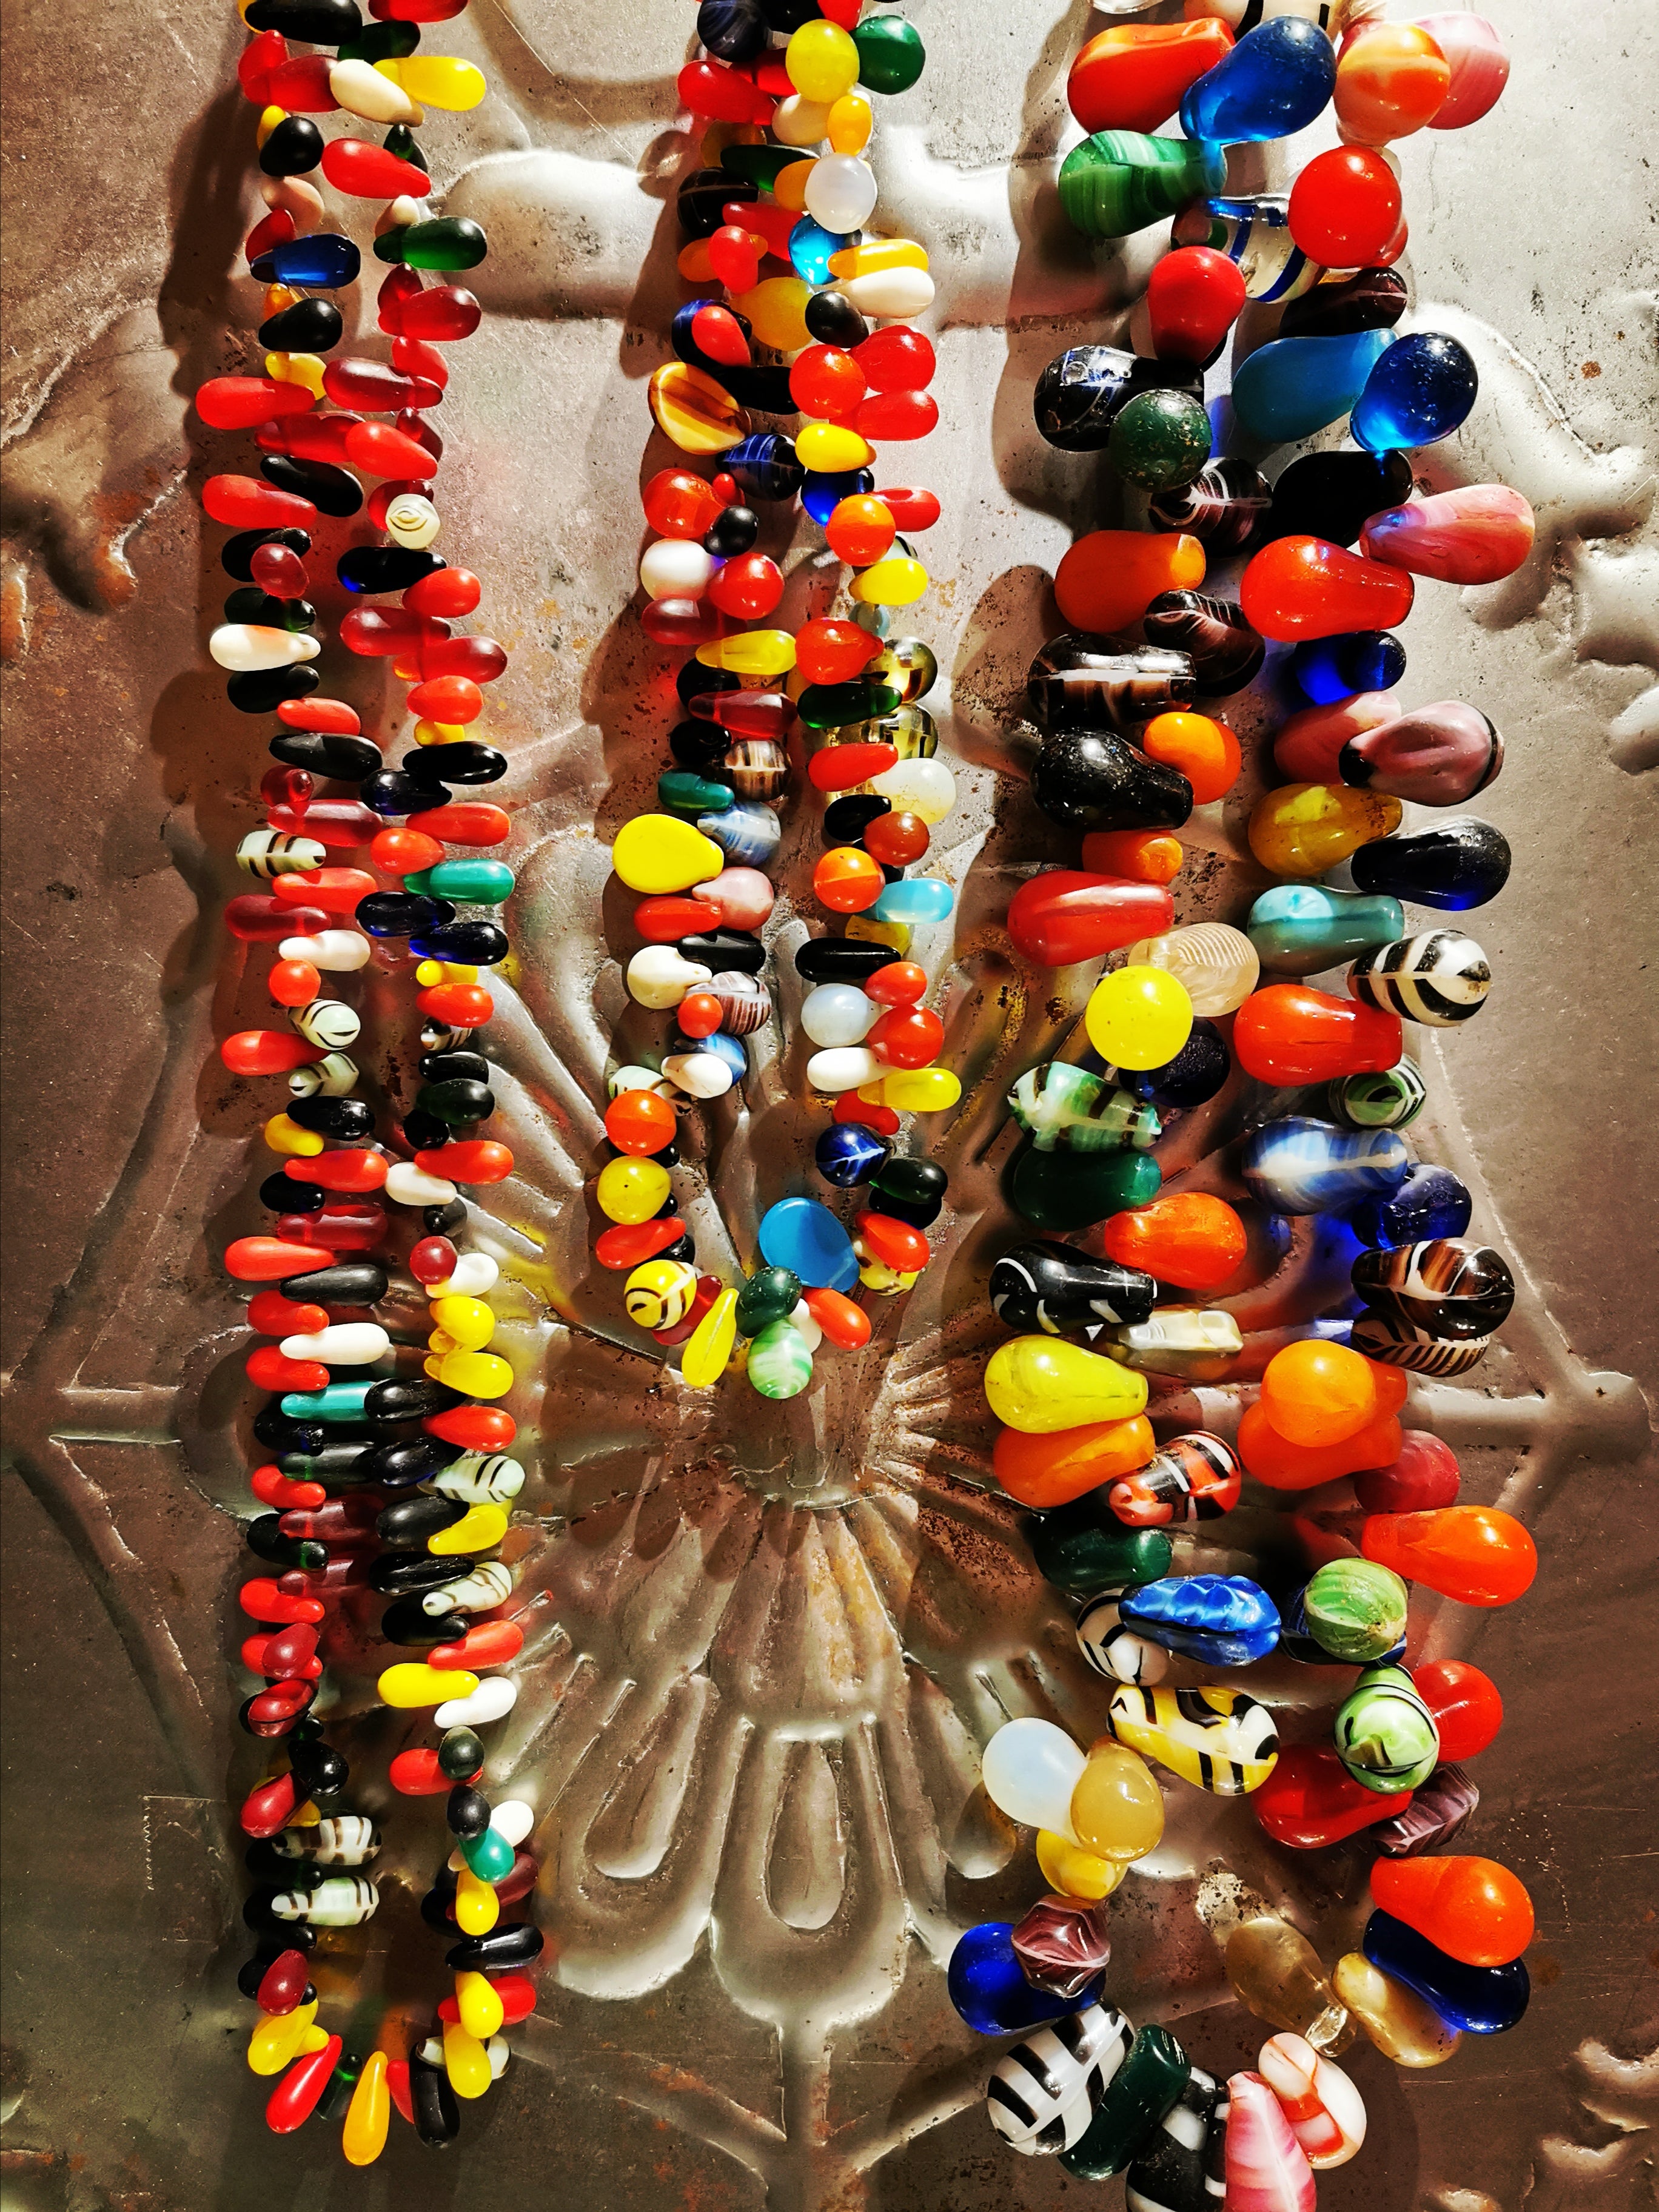 Beautiful age worn glass trade beads made between 1830 and 1932 in Bohemia for trade with the Fulani and Peul in Mali.These were bought and used as dowry beads,and the super modern looking designs were based on the original dowry beads from the area that would have been made in local agates.

 

